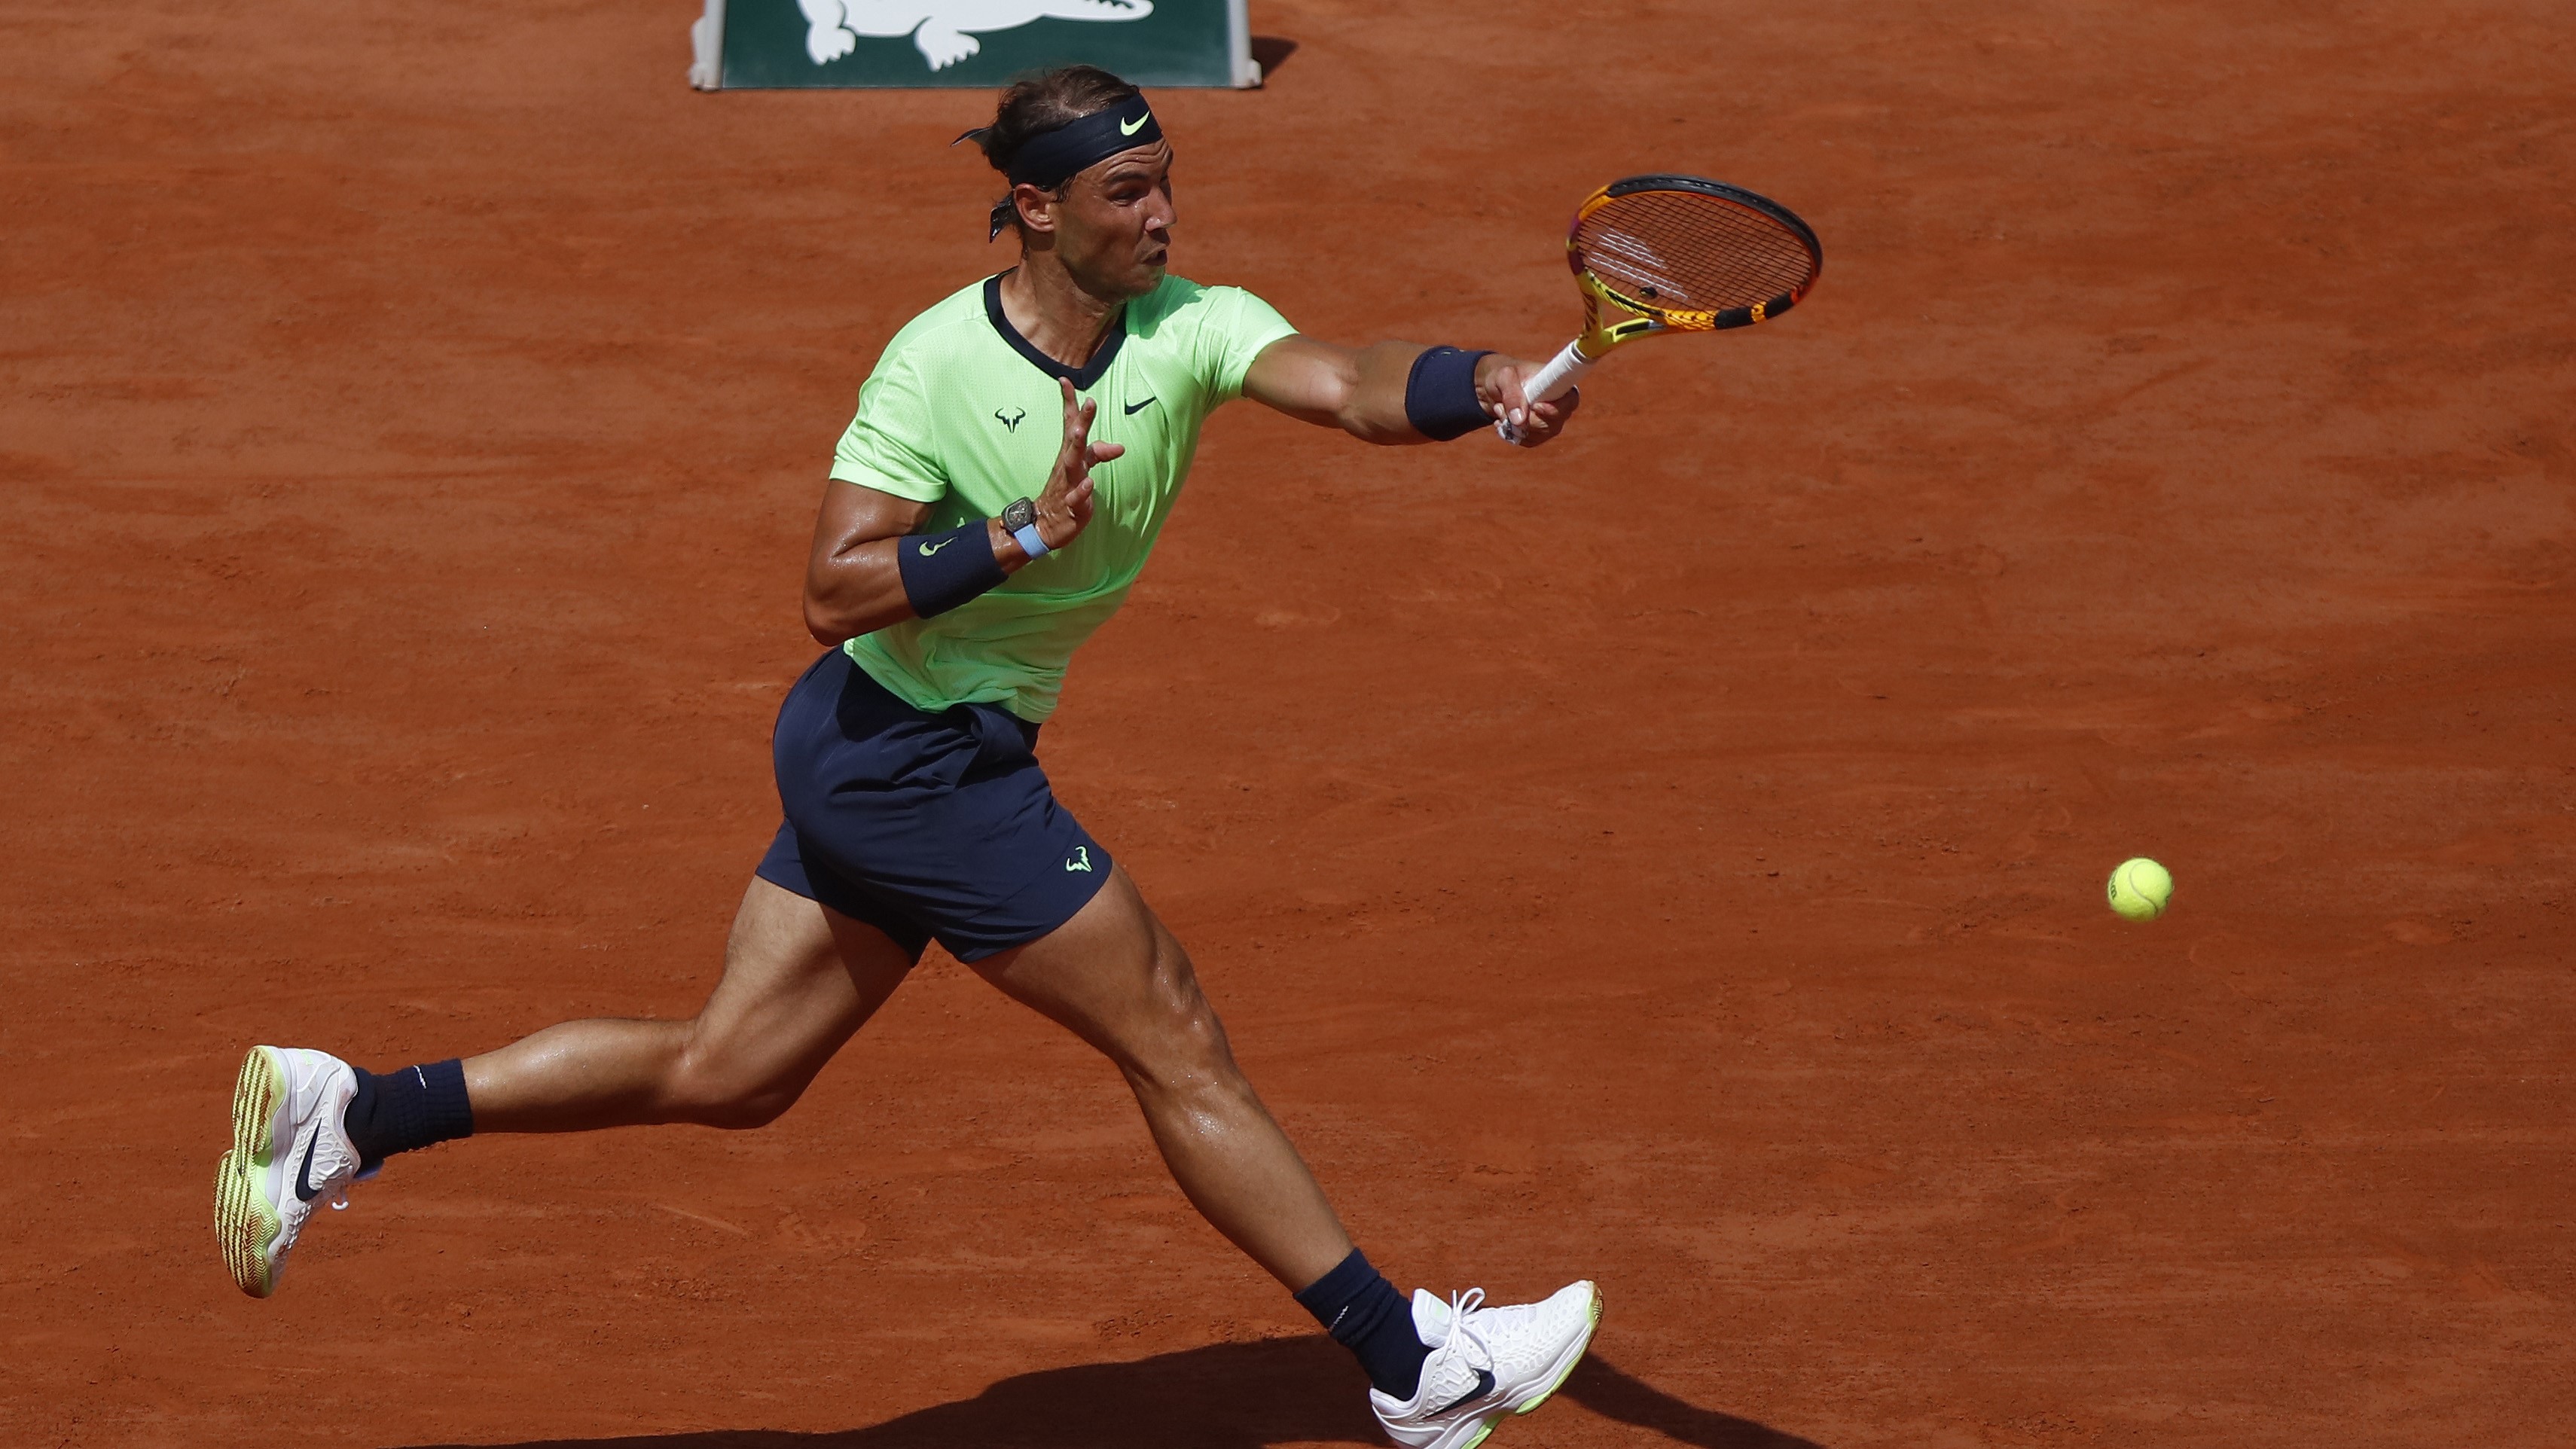 How to watch the 2022 French Open tennis tournament What to Watch